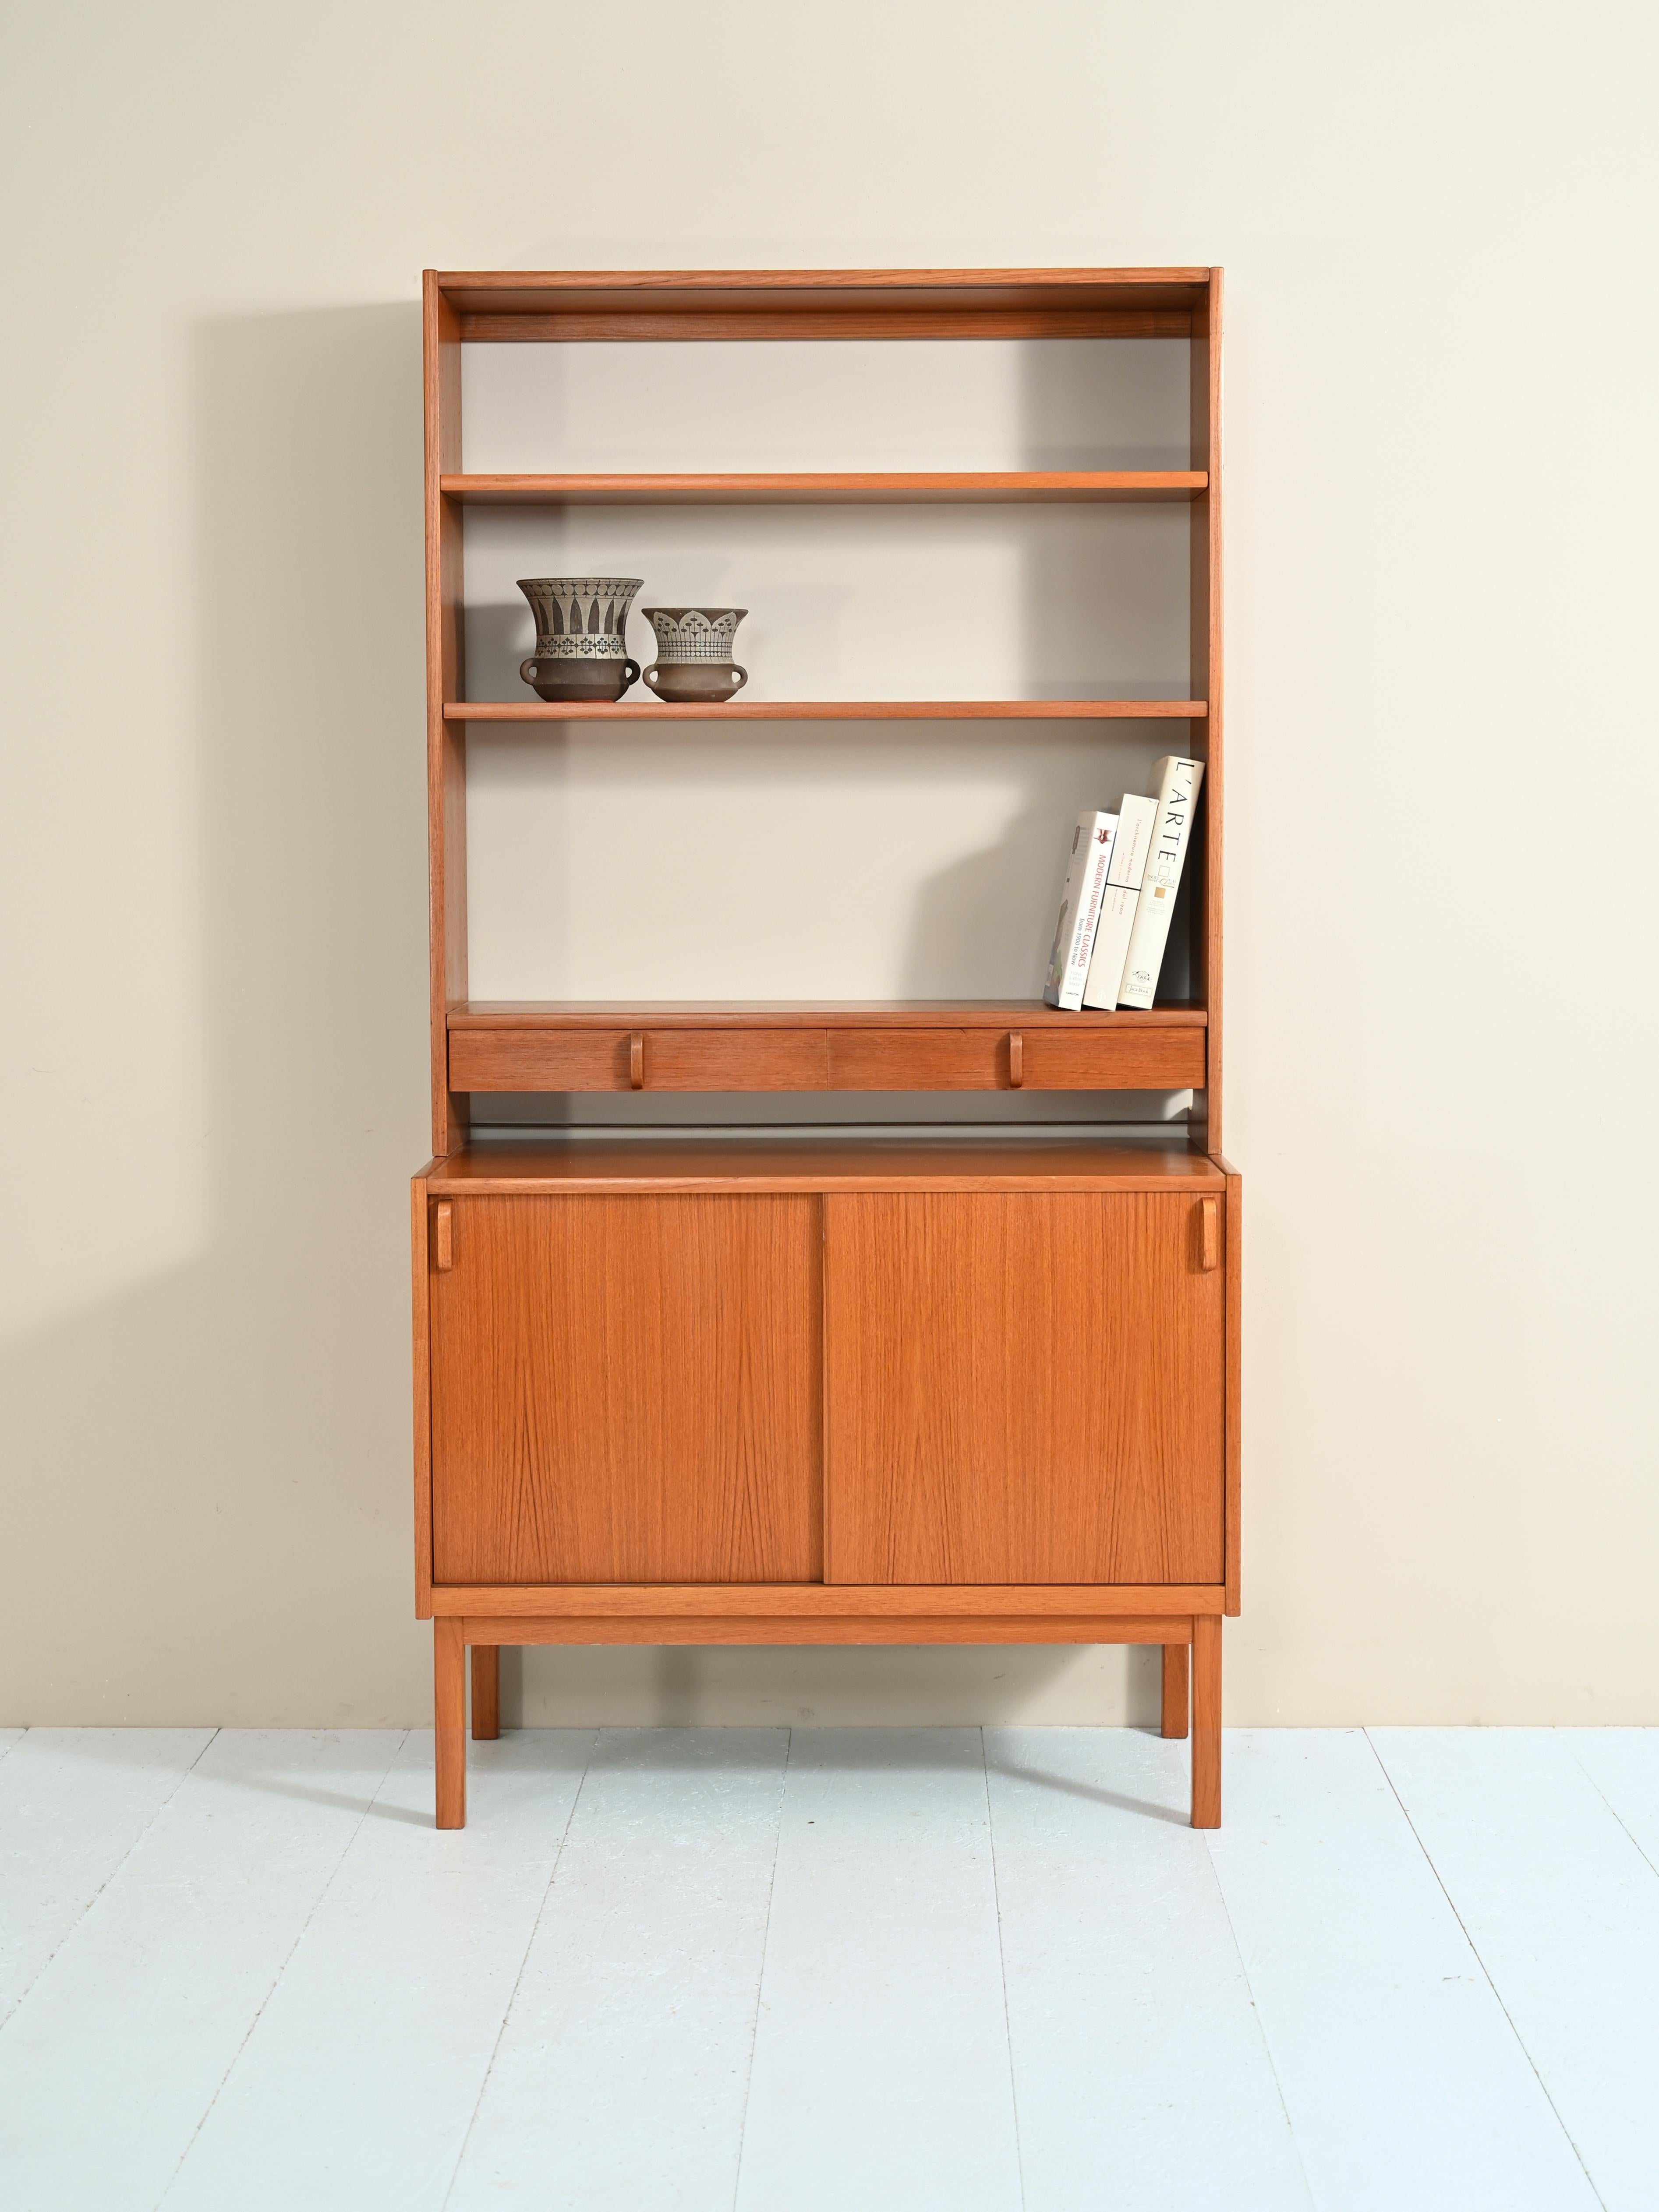 Small sideboard with sliding doors and olive interior.

A Scandinavian design piece with minimal lines, consisting of a storage compartment with an adjustable-height shelf. The sliding doors feature a curved wooden handle.
Thin tapered legs lend